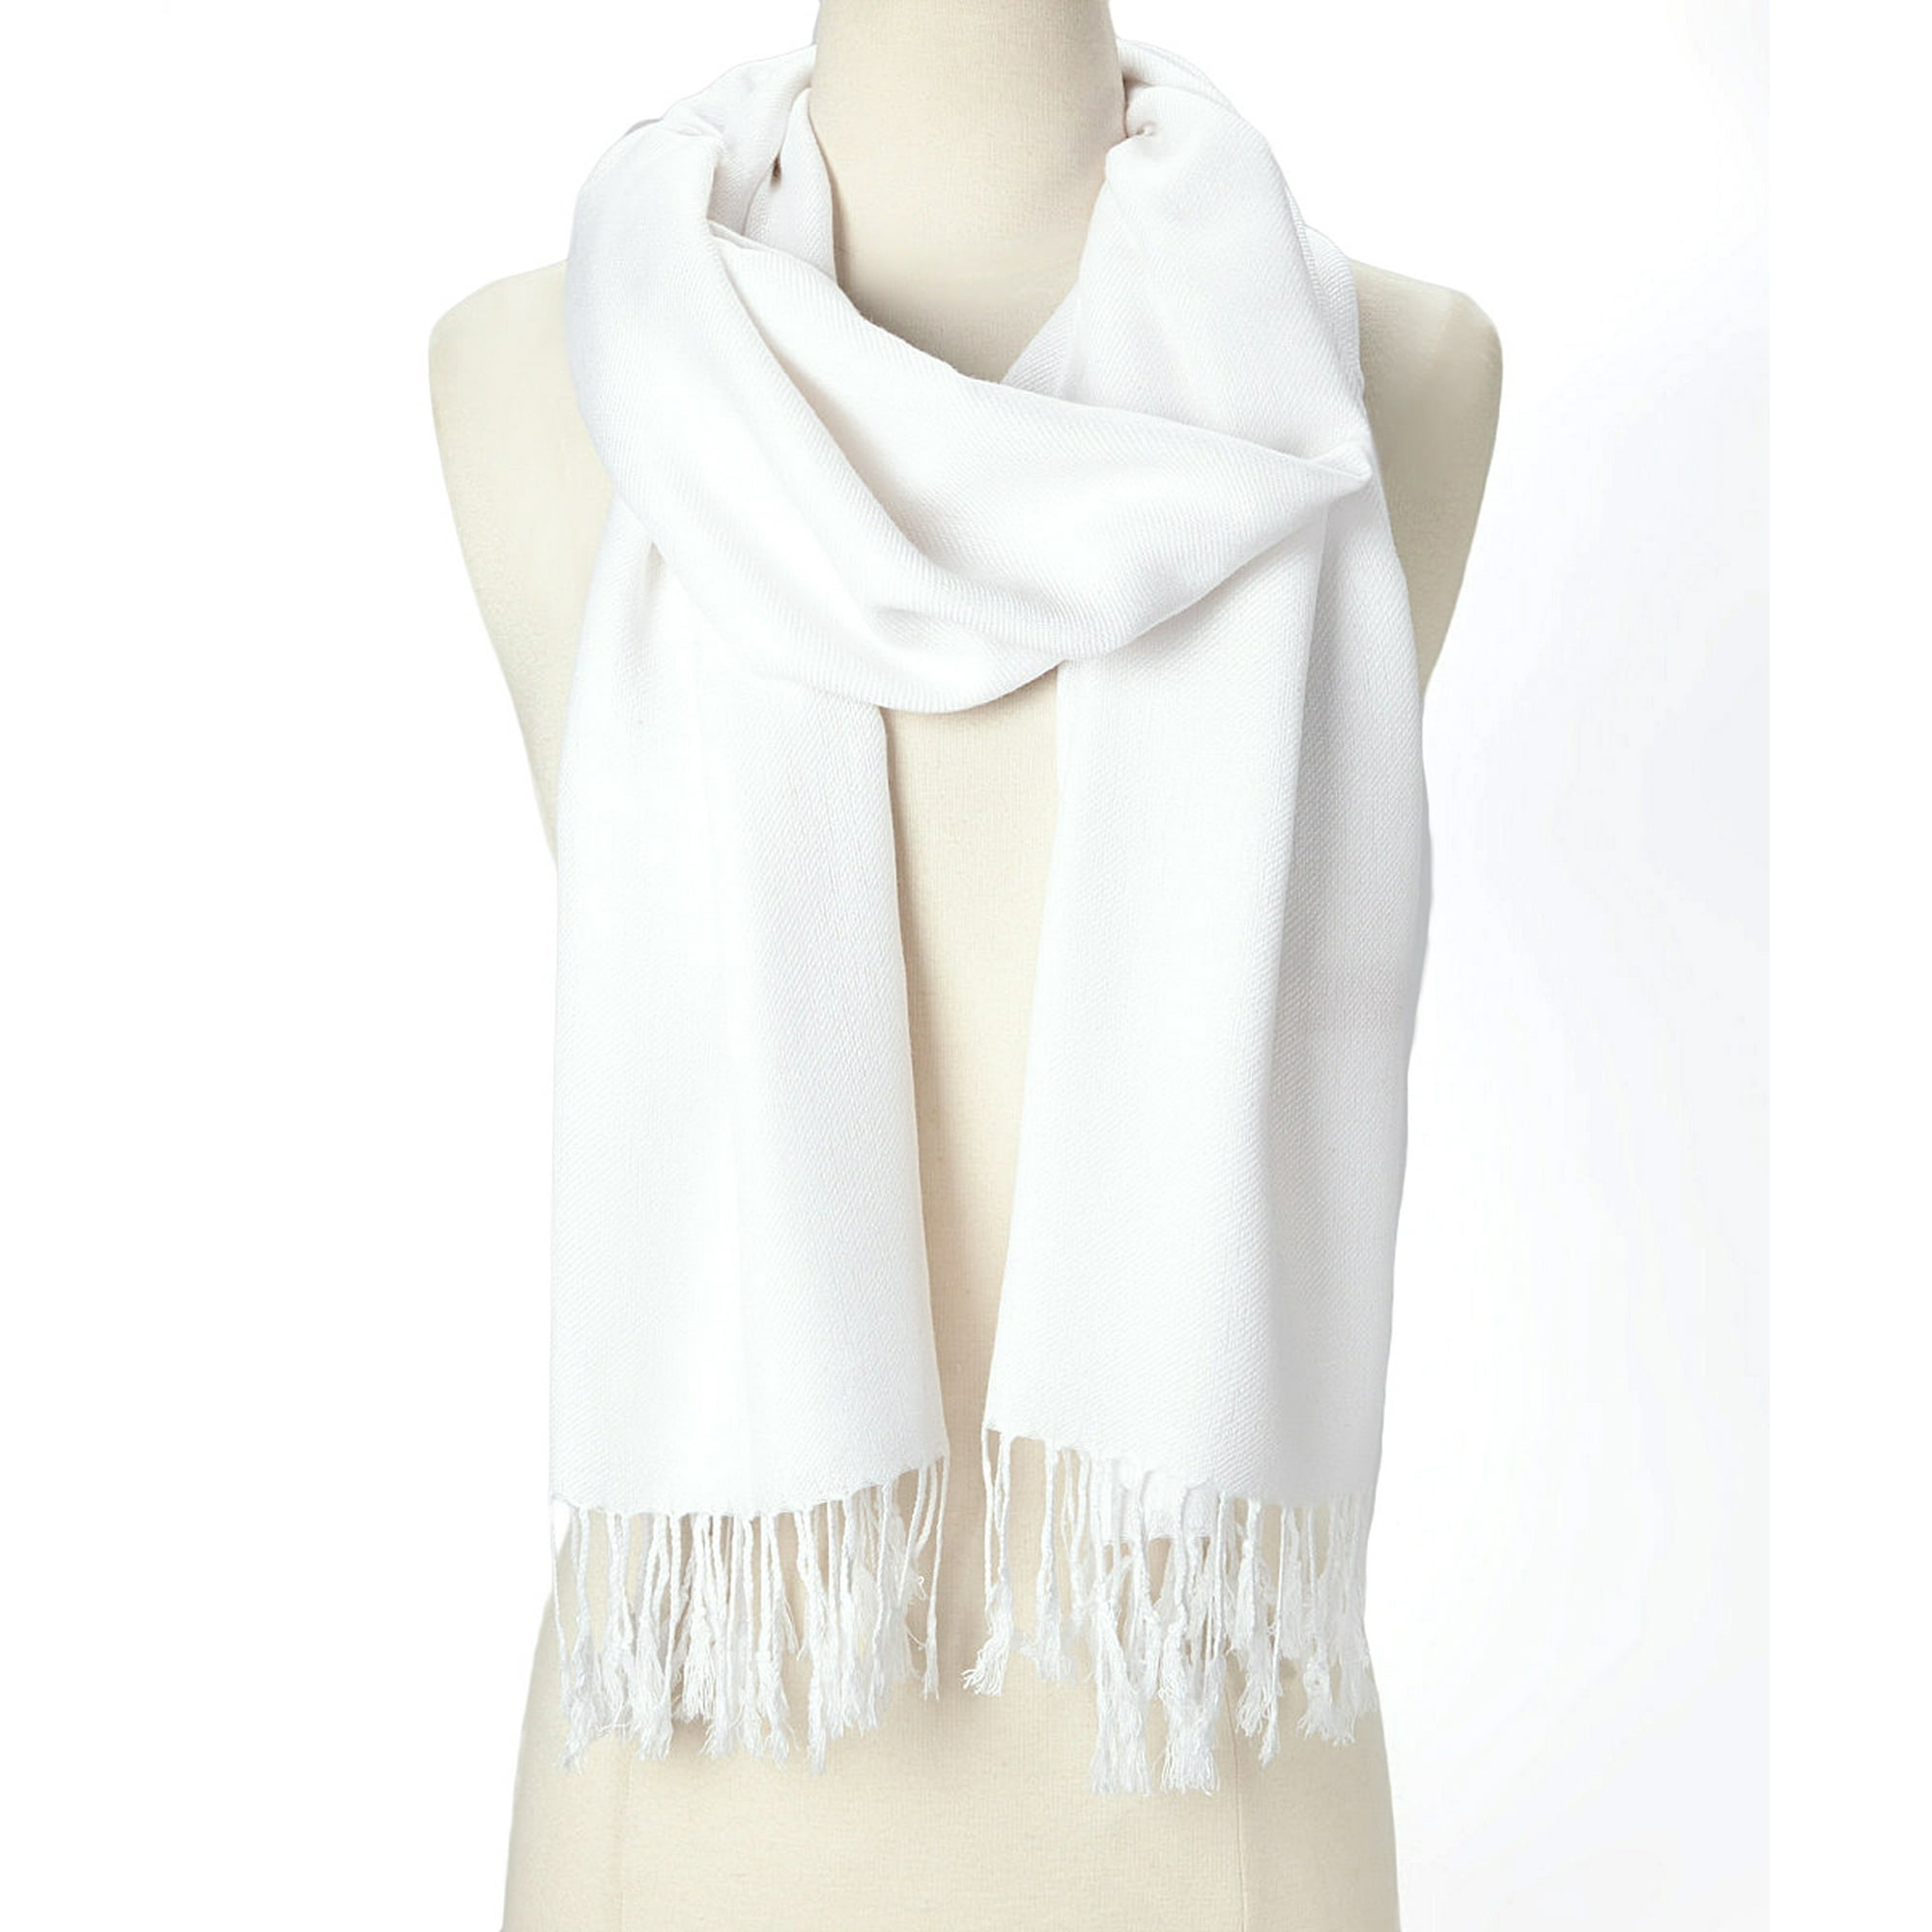 White Solid Scarfs for Women Fashion Warm Neck Womens Winter Scarves Pashmina Silk Scarf Wrap with Fringes for Ladies by Oussum, Women's, Size: Large